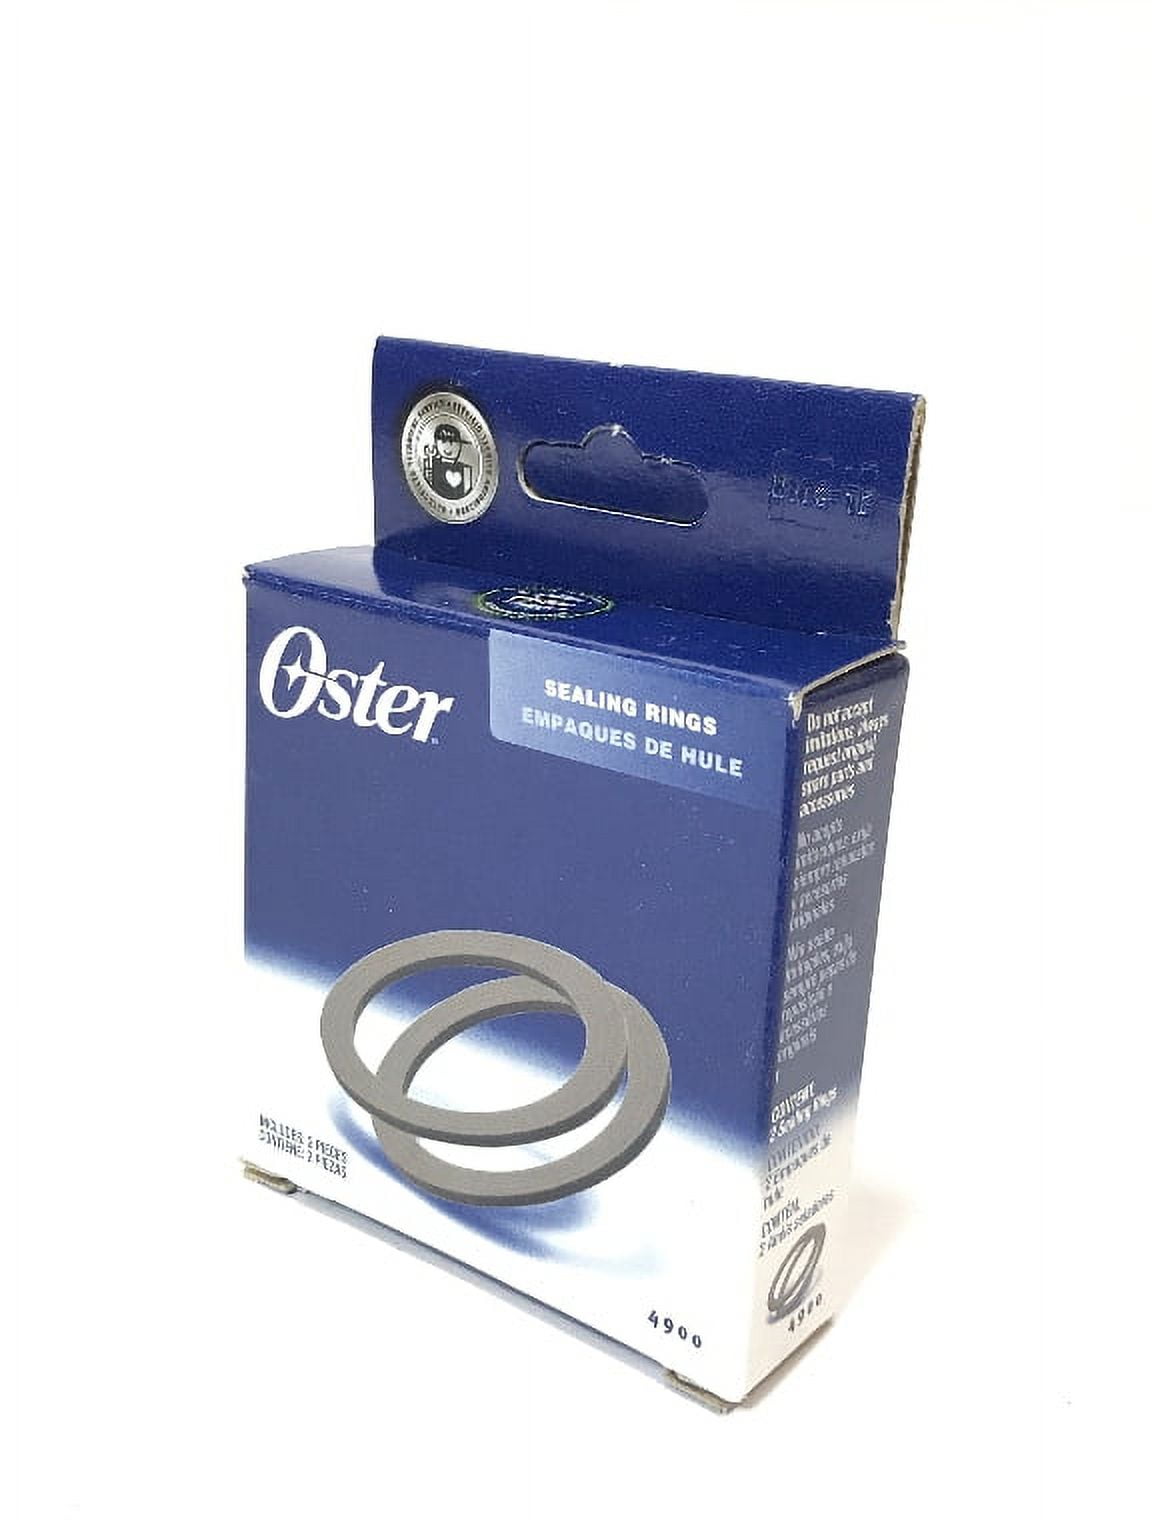 For Oster Osterizer Blender 4961-011 Ice Crushing Blade with Sealing Rings  Parts | eBay